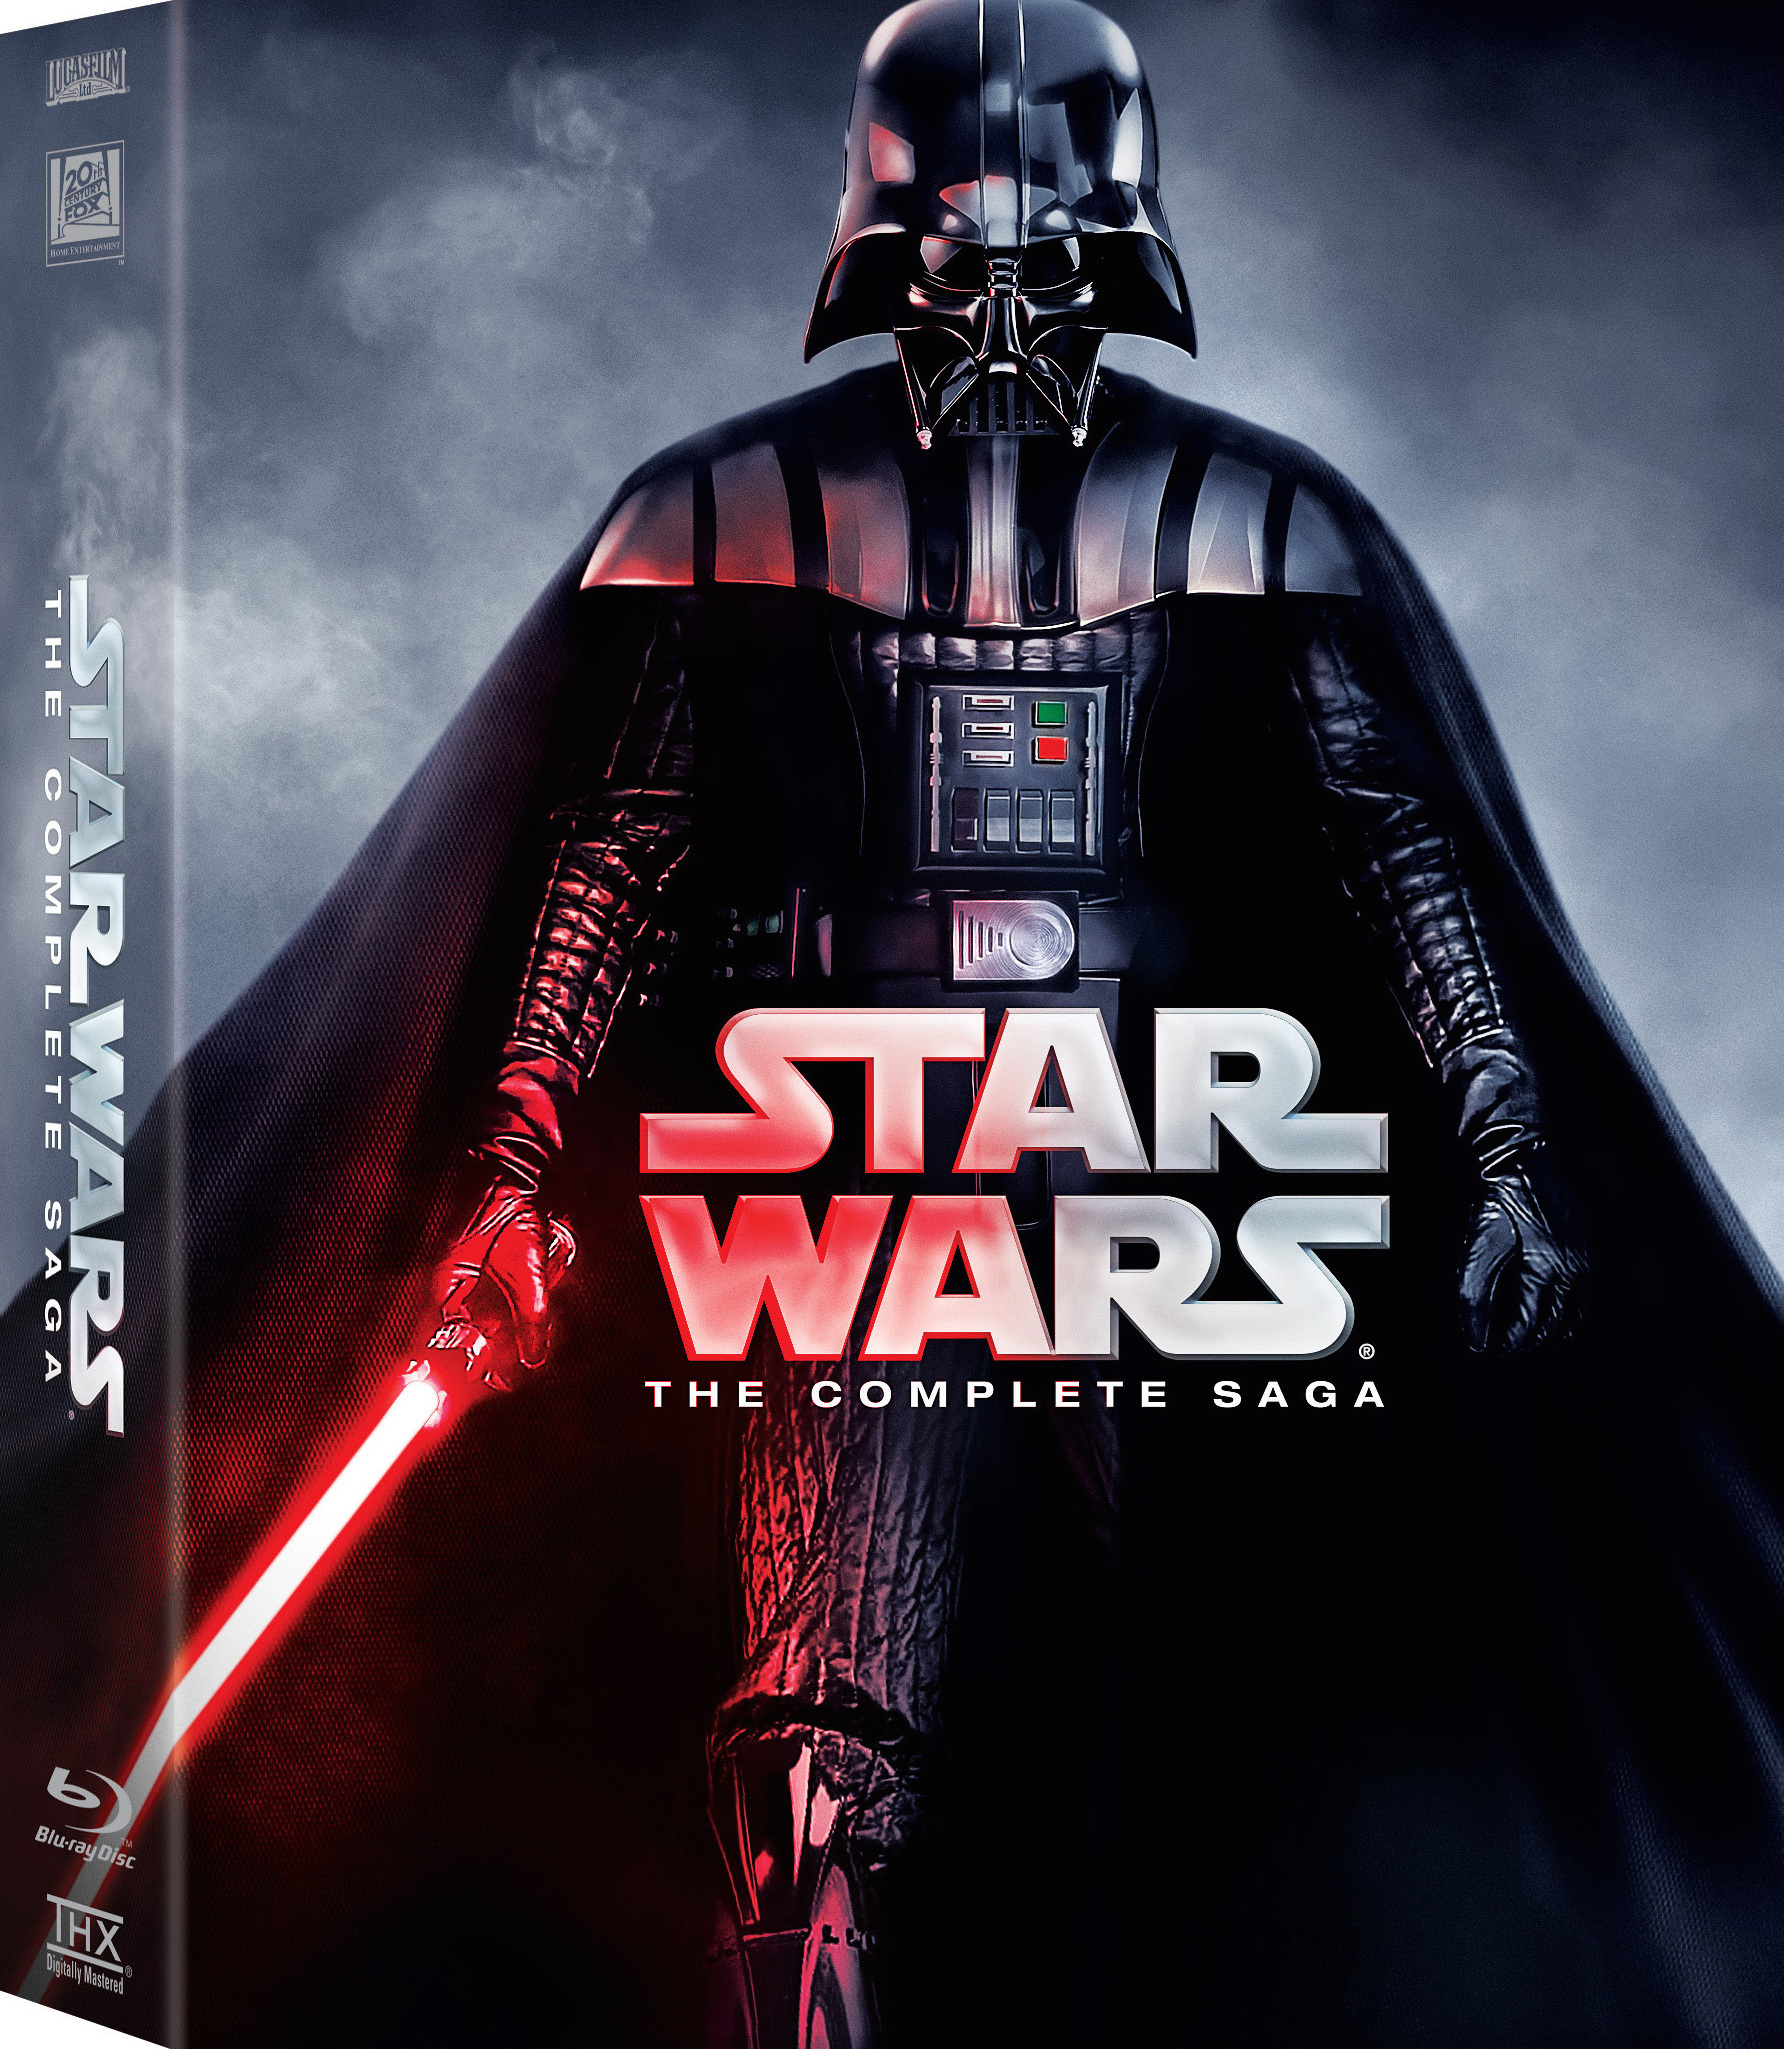 wars - Star Wars: The Complete Saga [Episodes I-VIII] (1977-2017) Star Wars: La Saga Completa [Episodios I-VIII] (1977-2017) [AC3 5.1 + SUP] [Blu Ray-Rip] 137947_front